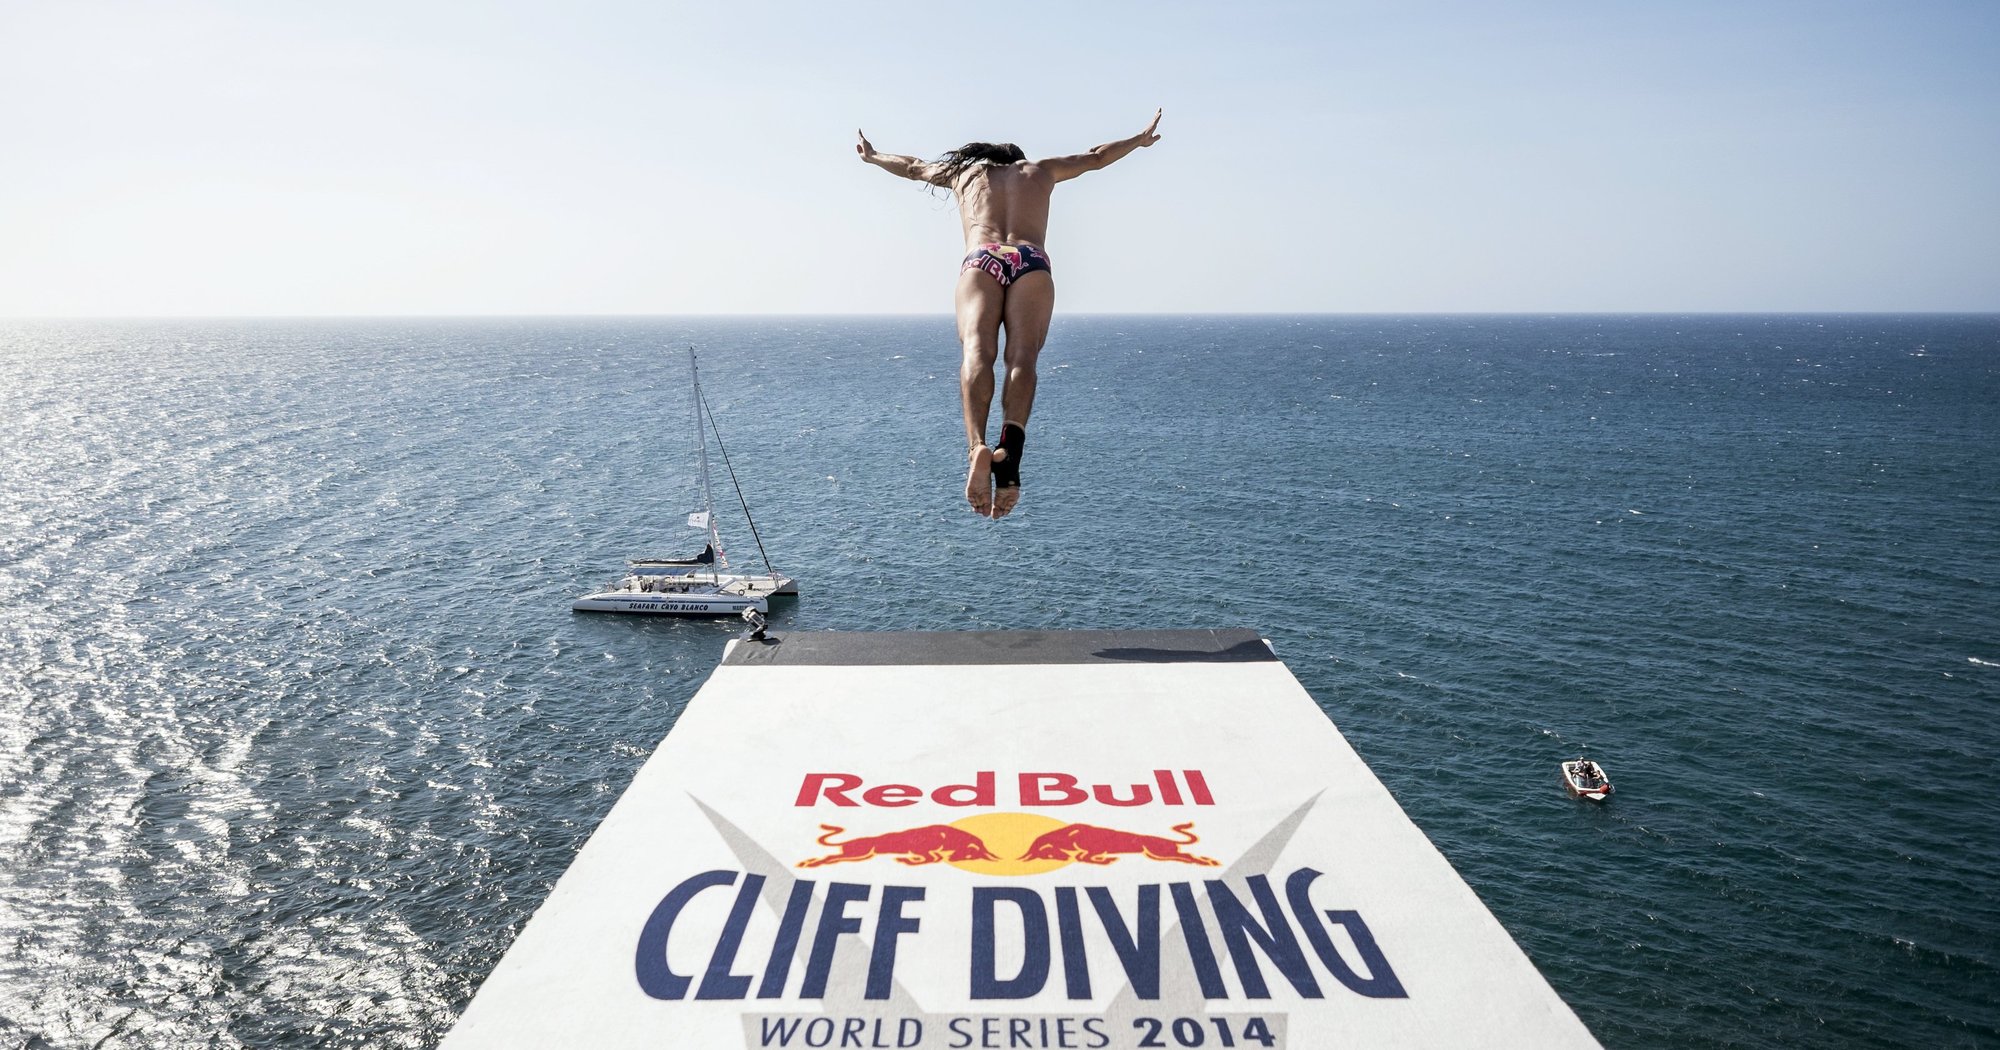 Red Bull Cliff Diving World Series start in Cartagena